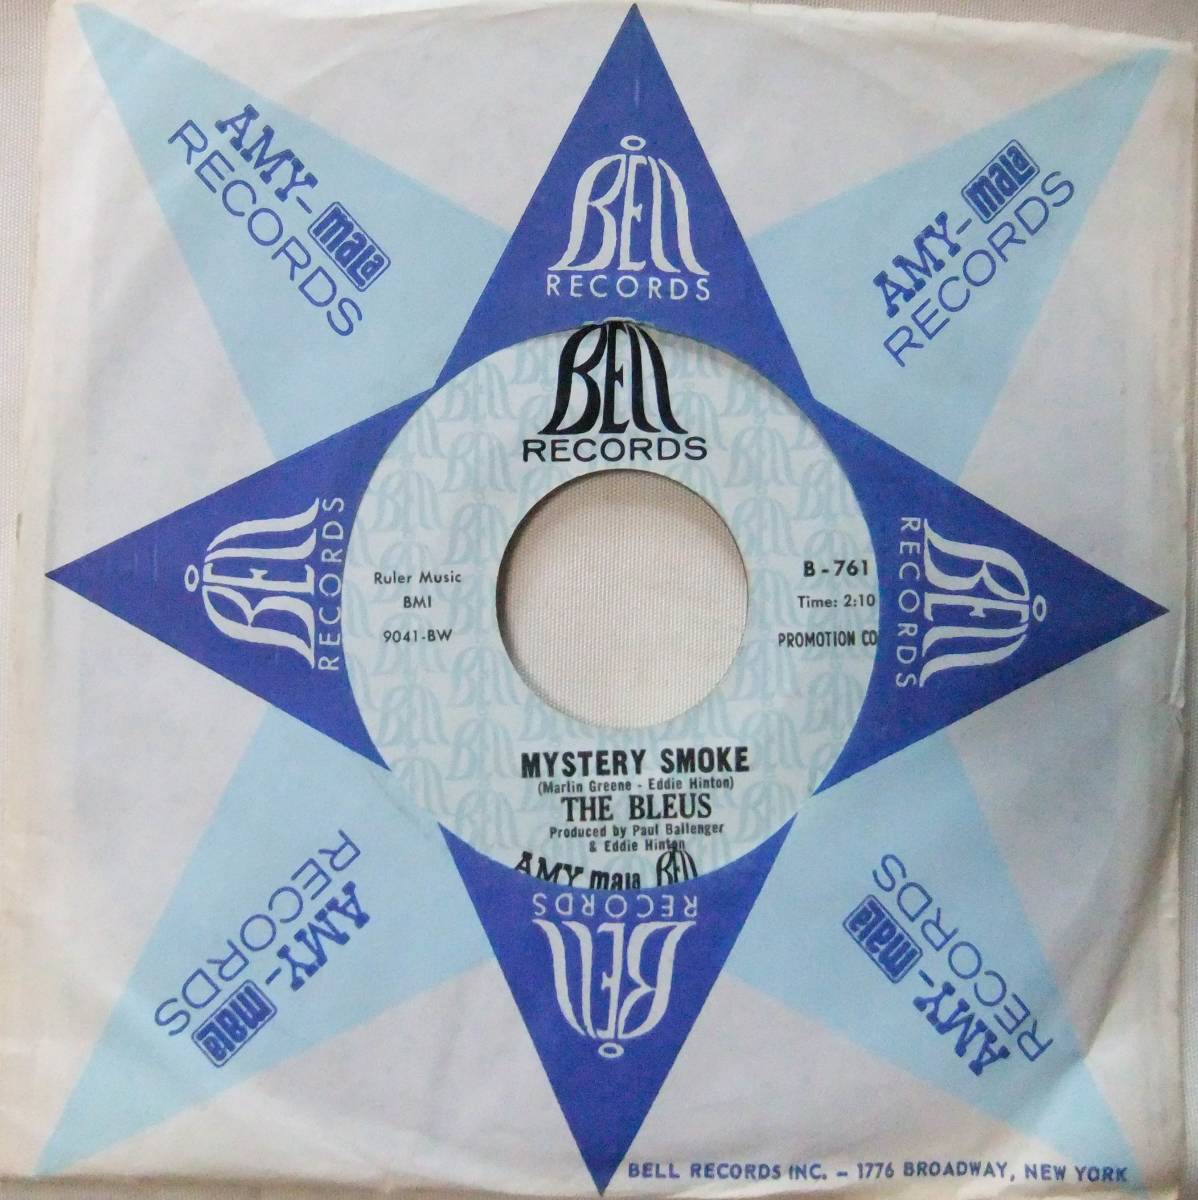 PayPayフリマ｜The Bleus / feat Duane Allman / A Julianna's Gone - B Mystery  Smoke / '7inch Single / '69US Bell Records / Promo-copy